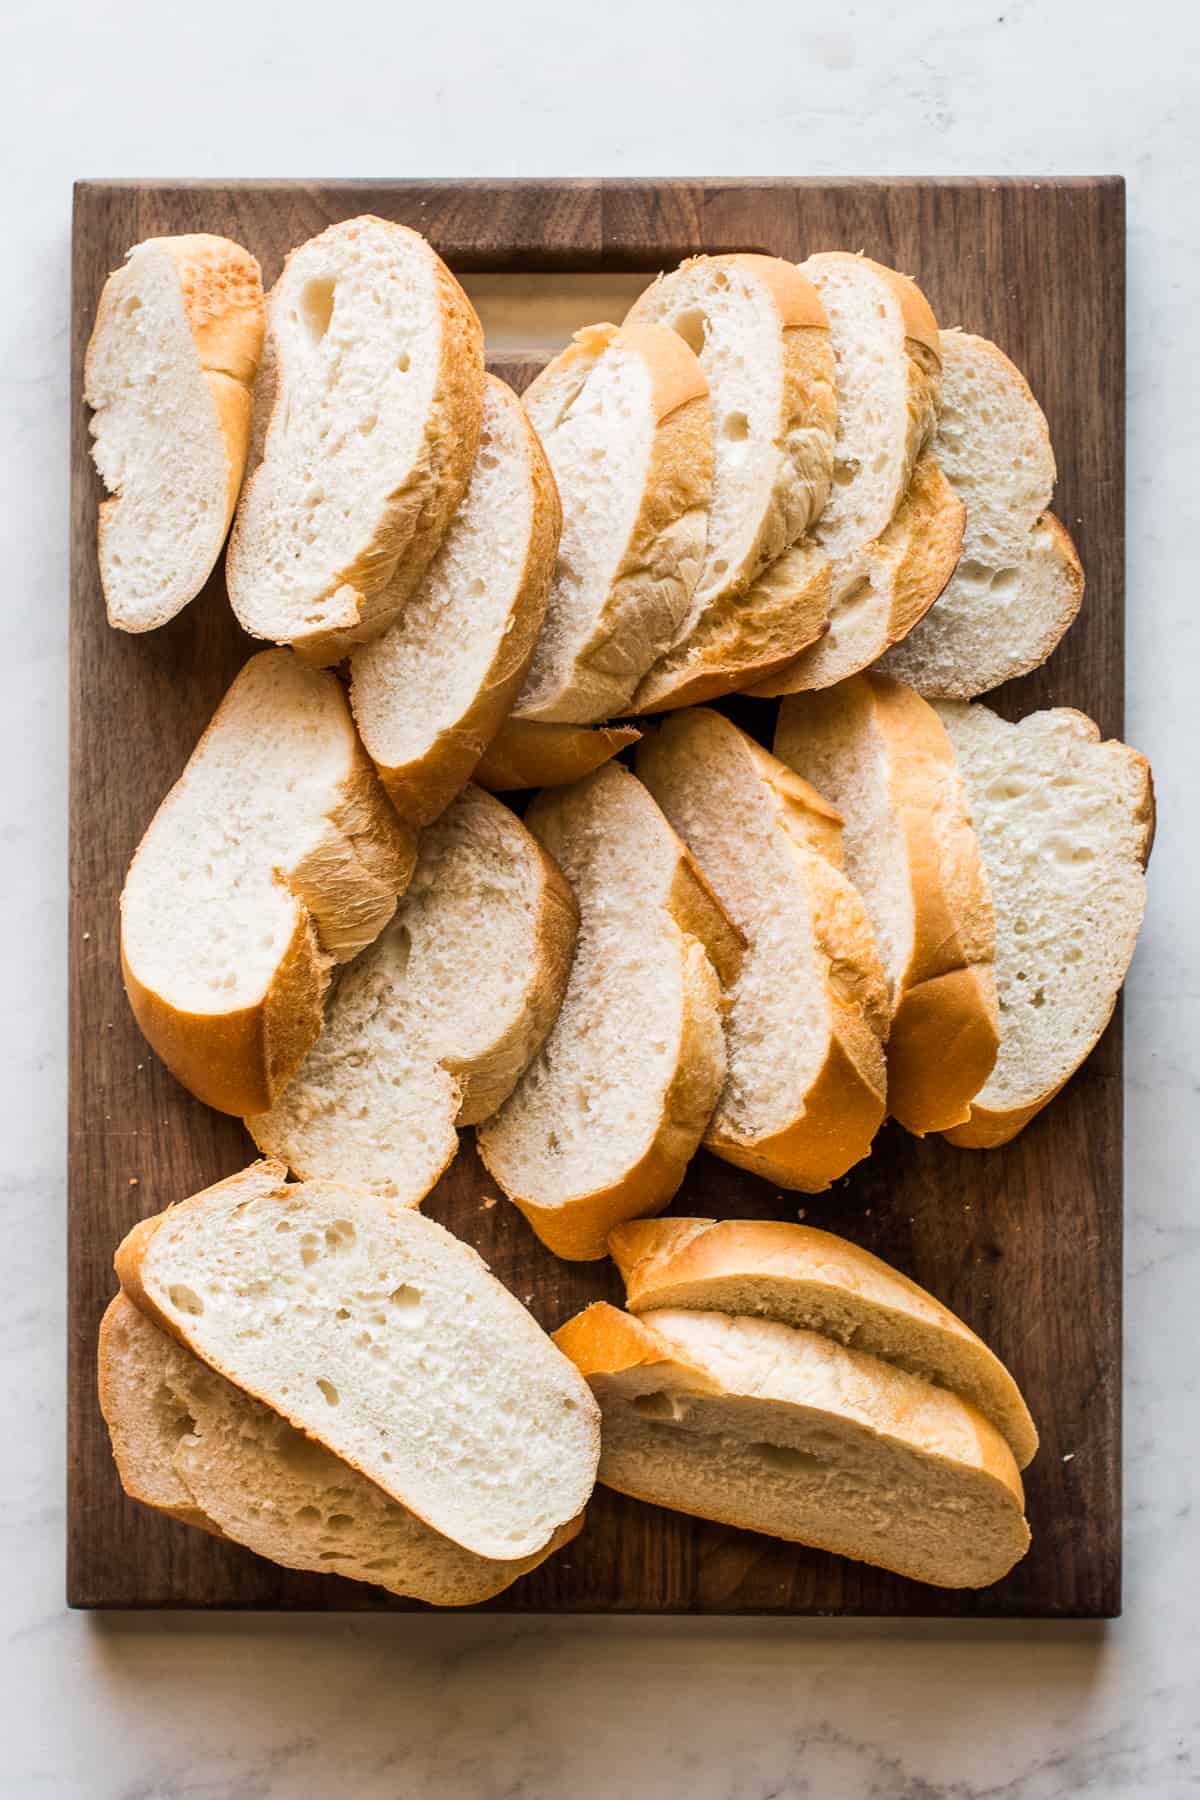 Slices of bolillo bread on a cutting board for torrejas.